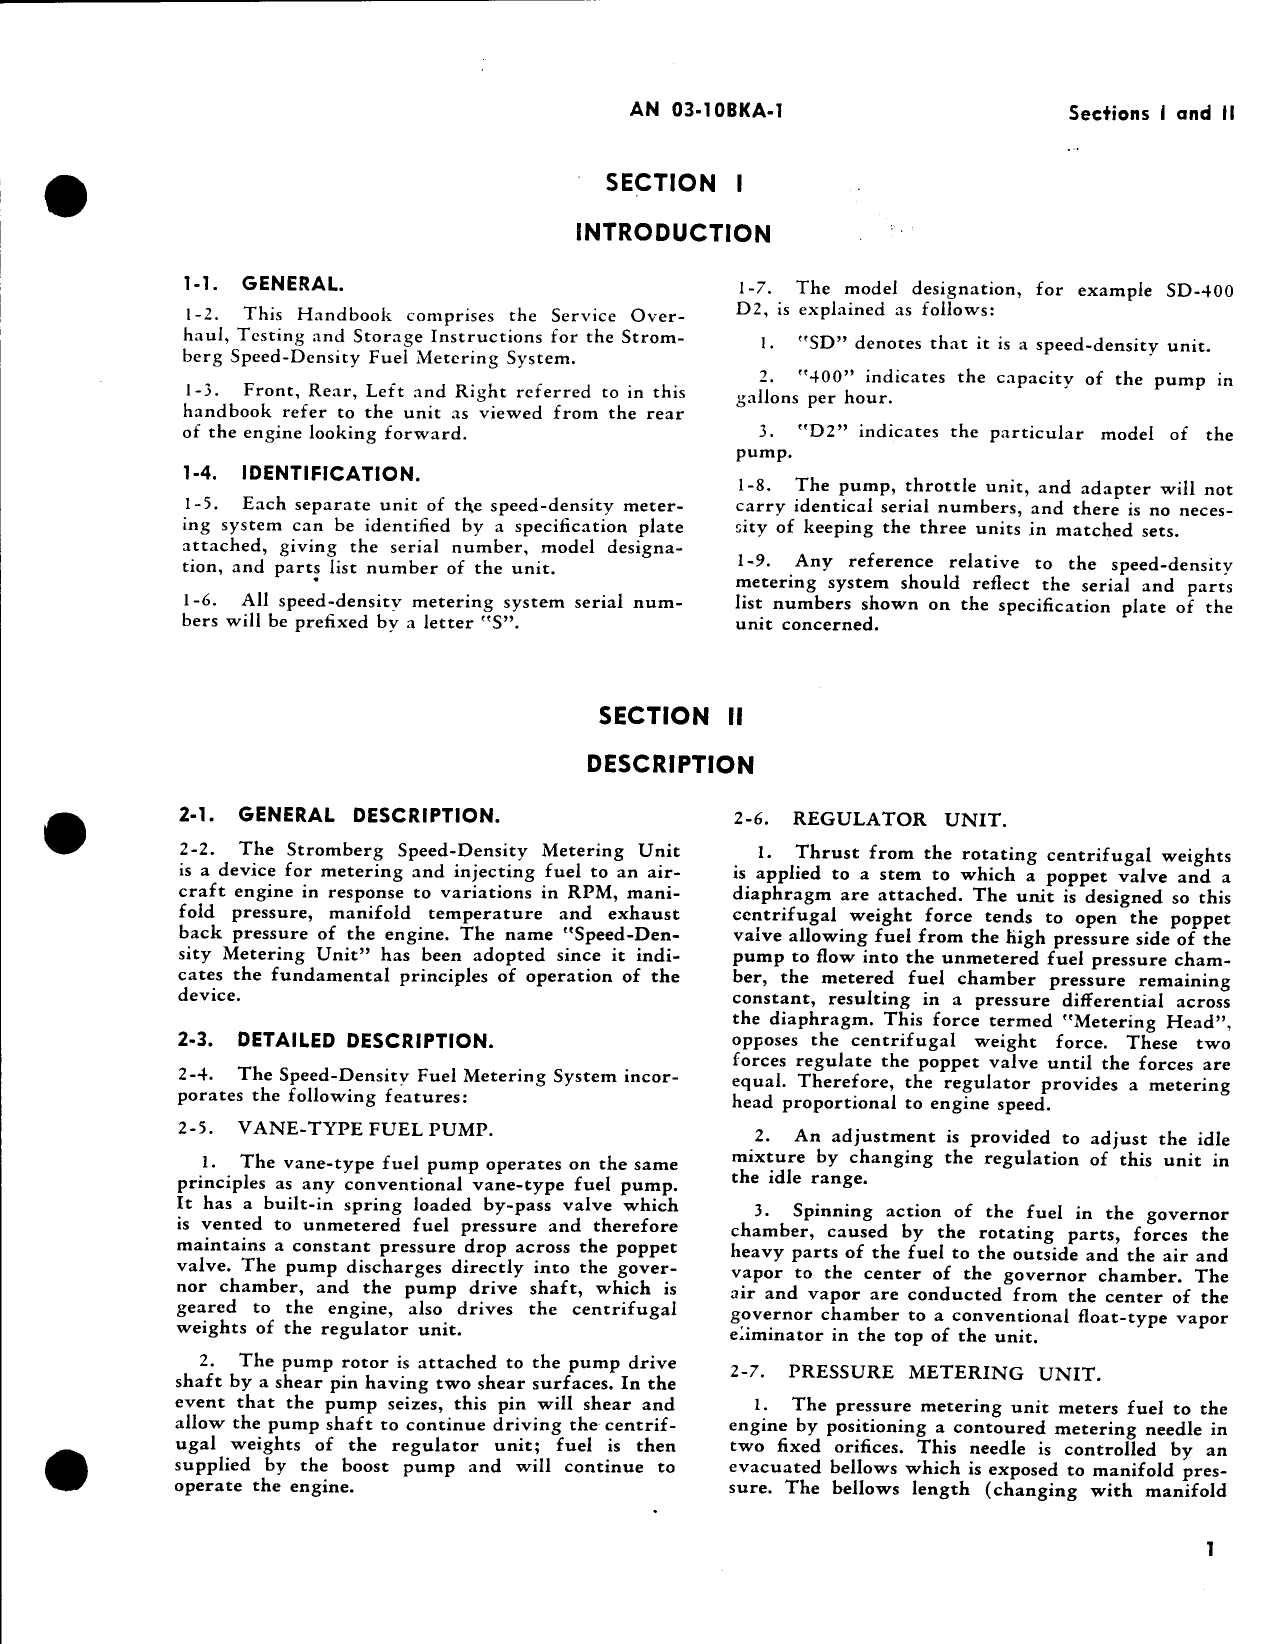 Sample page 5 from AirCorps Library document: Handbook Overhaul Instructions for Speed-Density Fuel Metering System (Bendix)